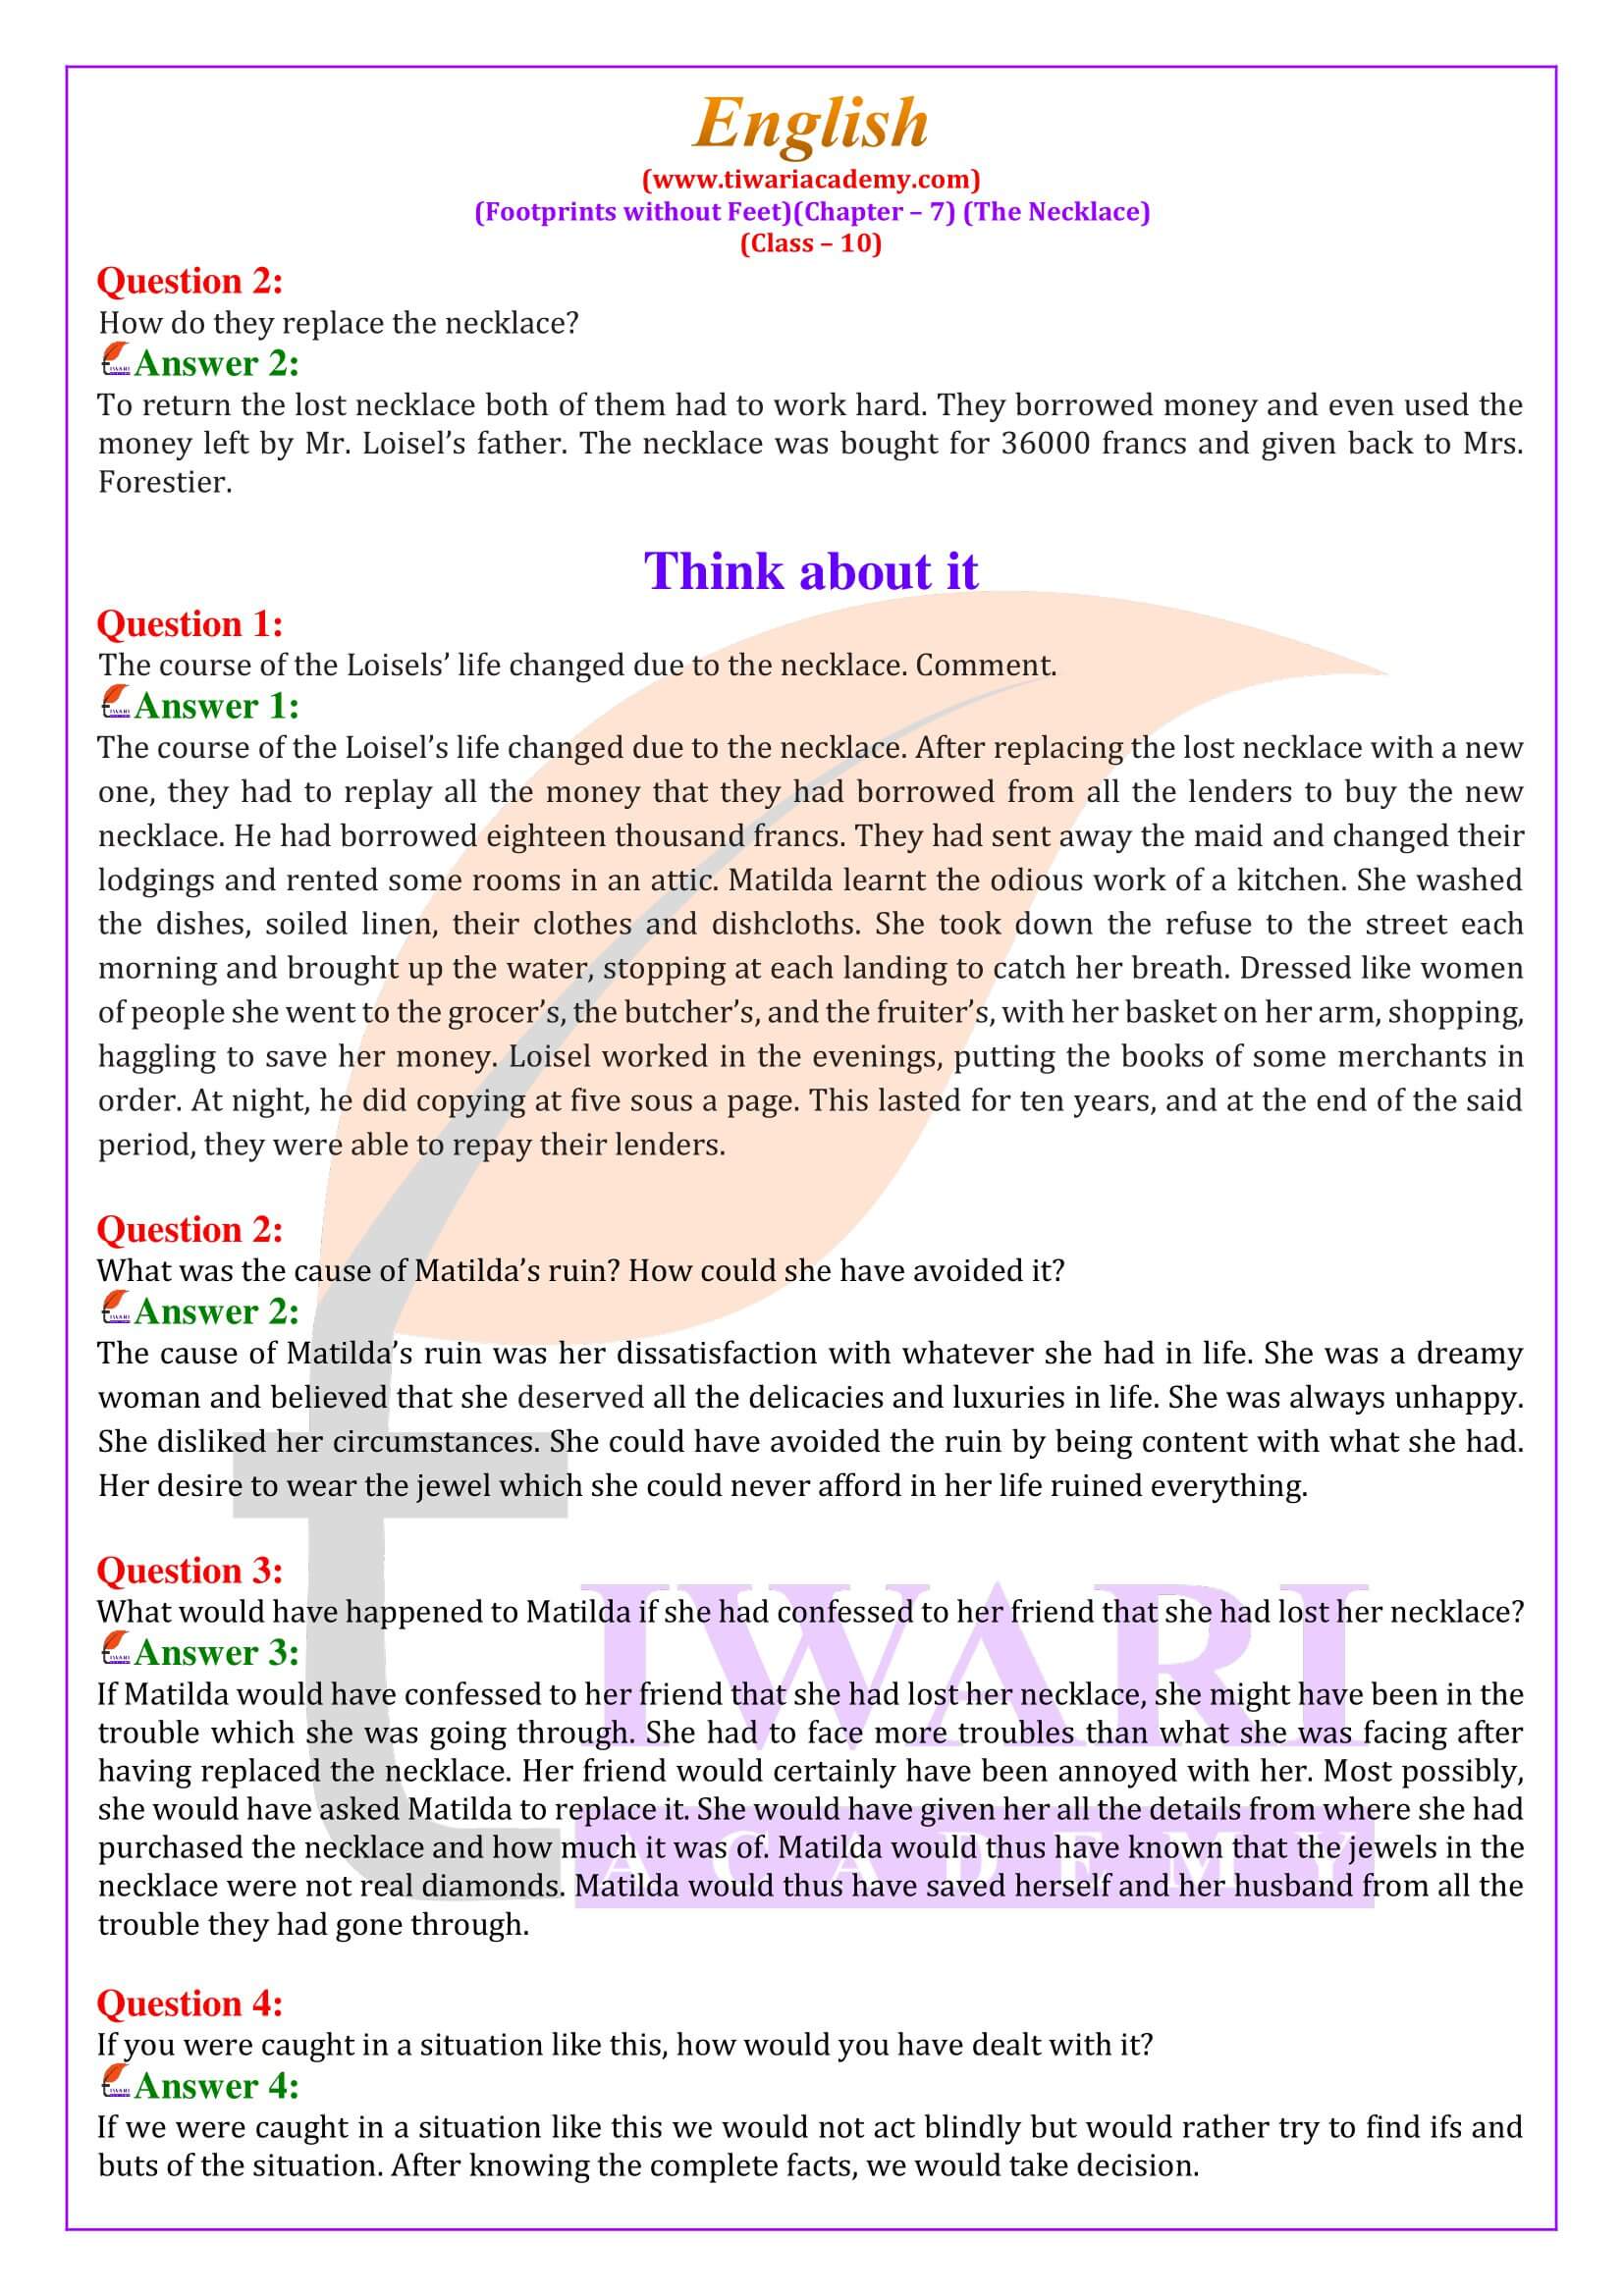 NCERT Solutions for Class 10 English Chapter 7